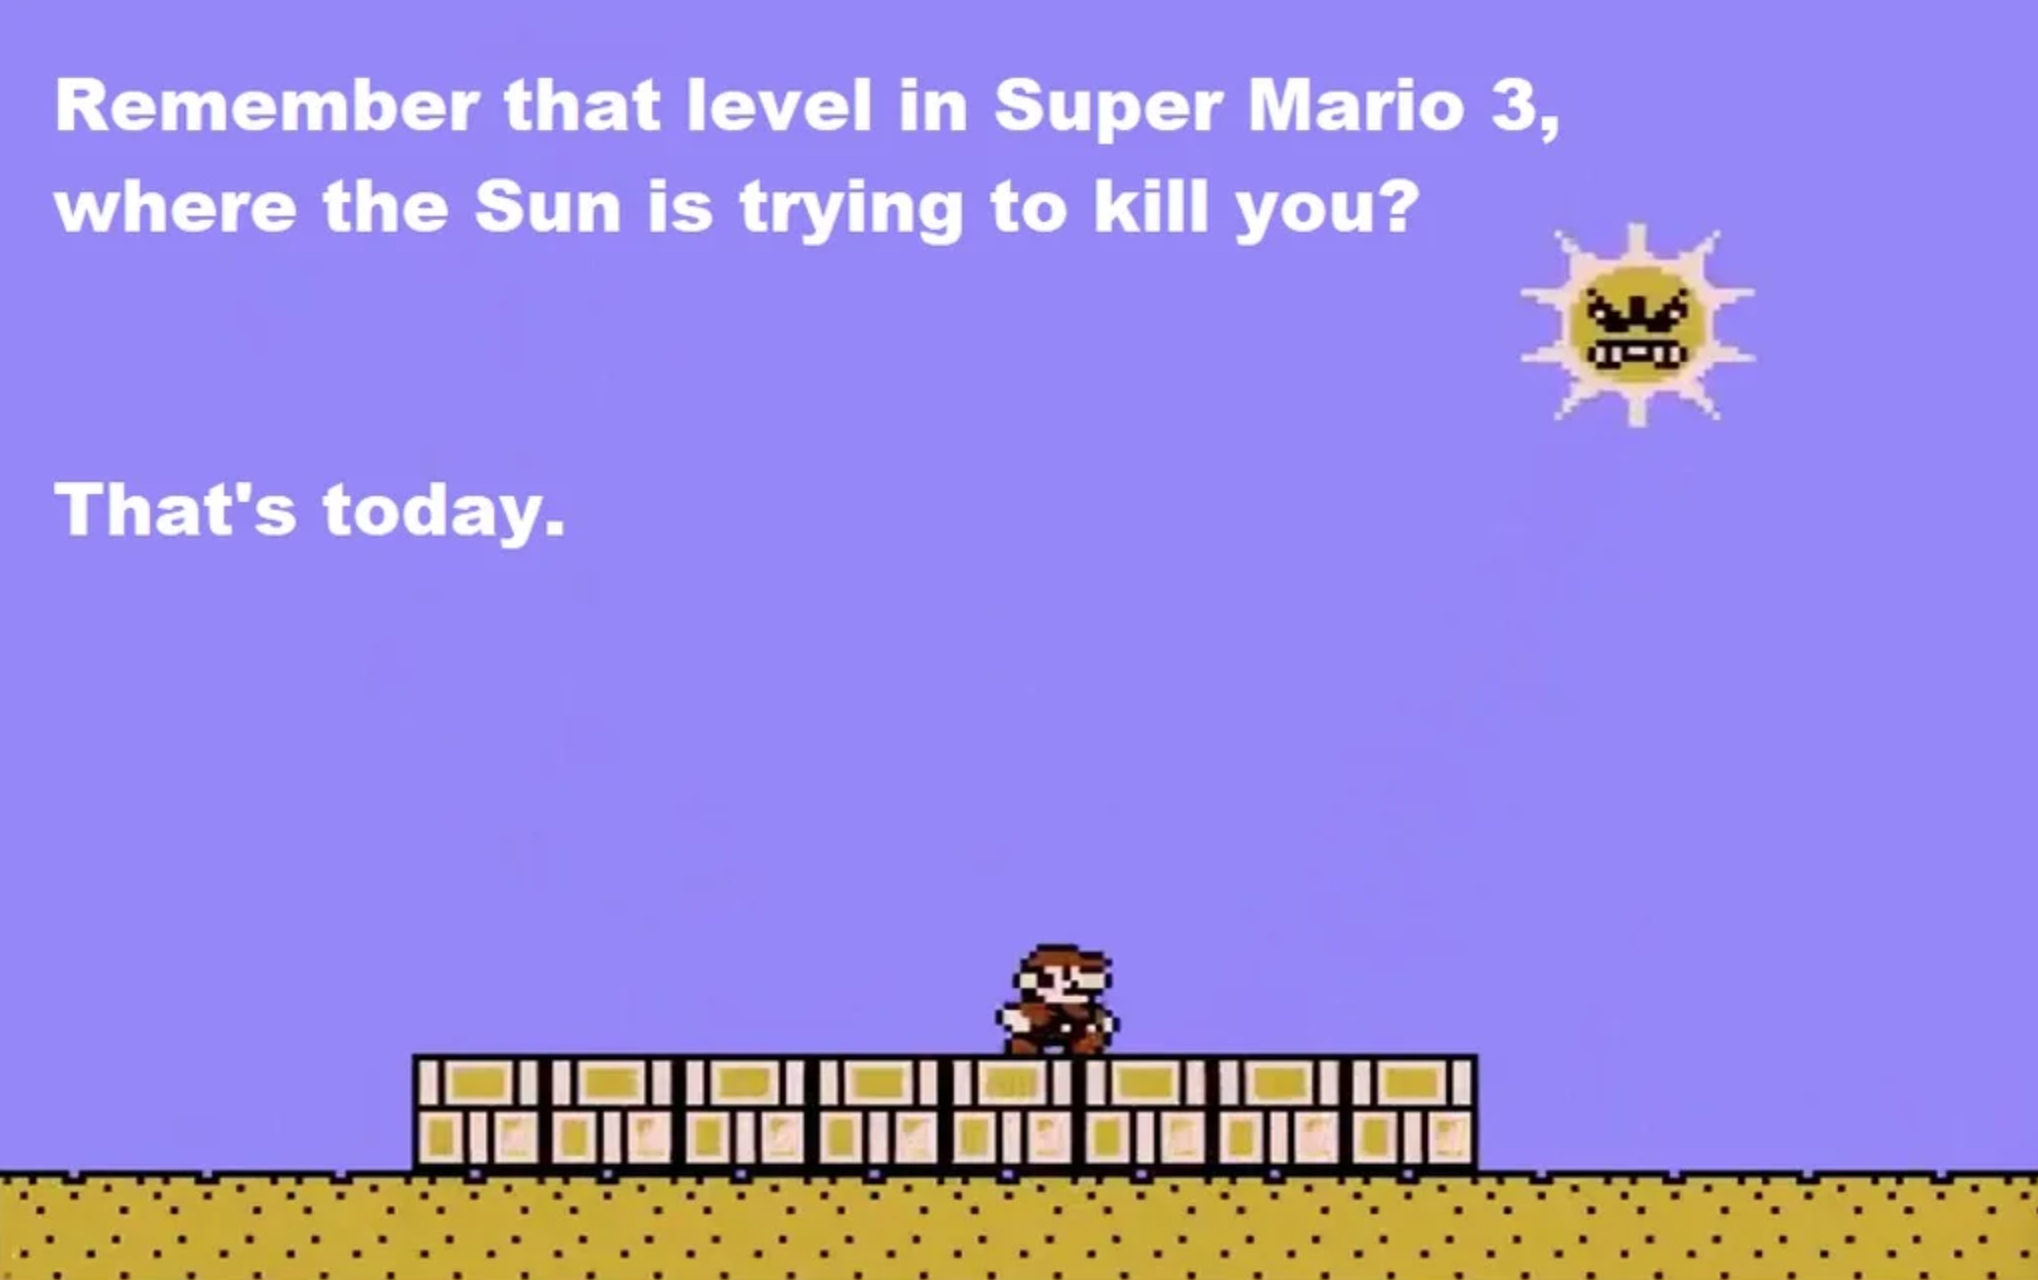 super mario sun - Remember that level in Super Mario 3, where the Sun is trying to kill you? Pd That's today.